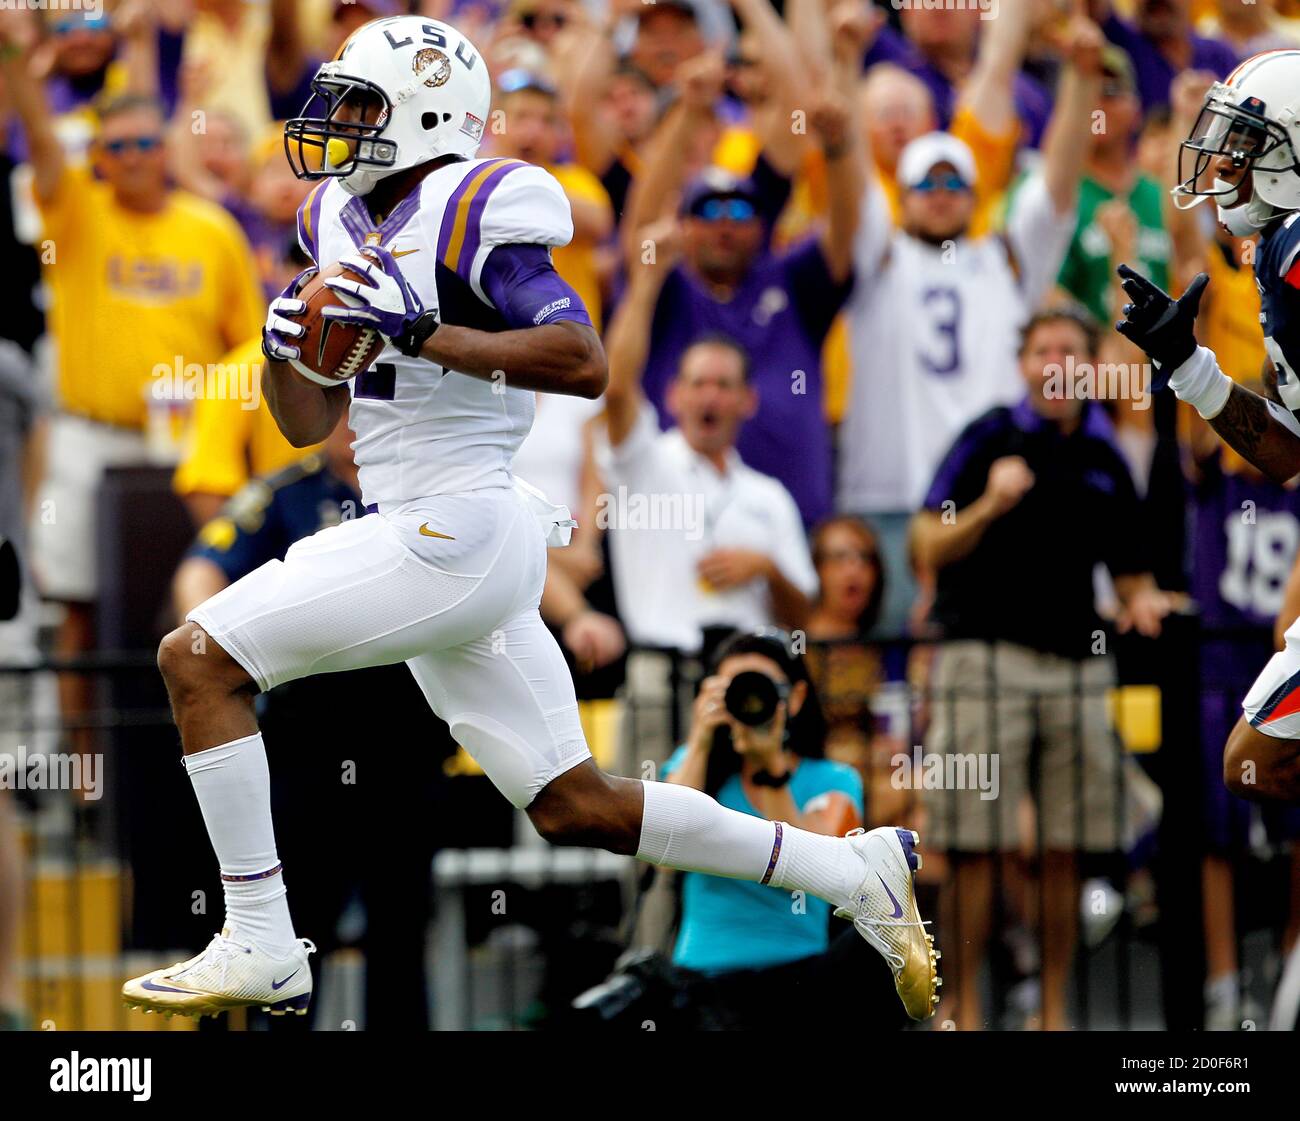 Louisiana State University wide receiver Rueben Randel (2) runs into the  end zone while scoring on a touchdown pass against Auburn University during  their NCAA football game in Baton Rouge, Louisiana October